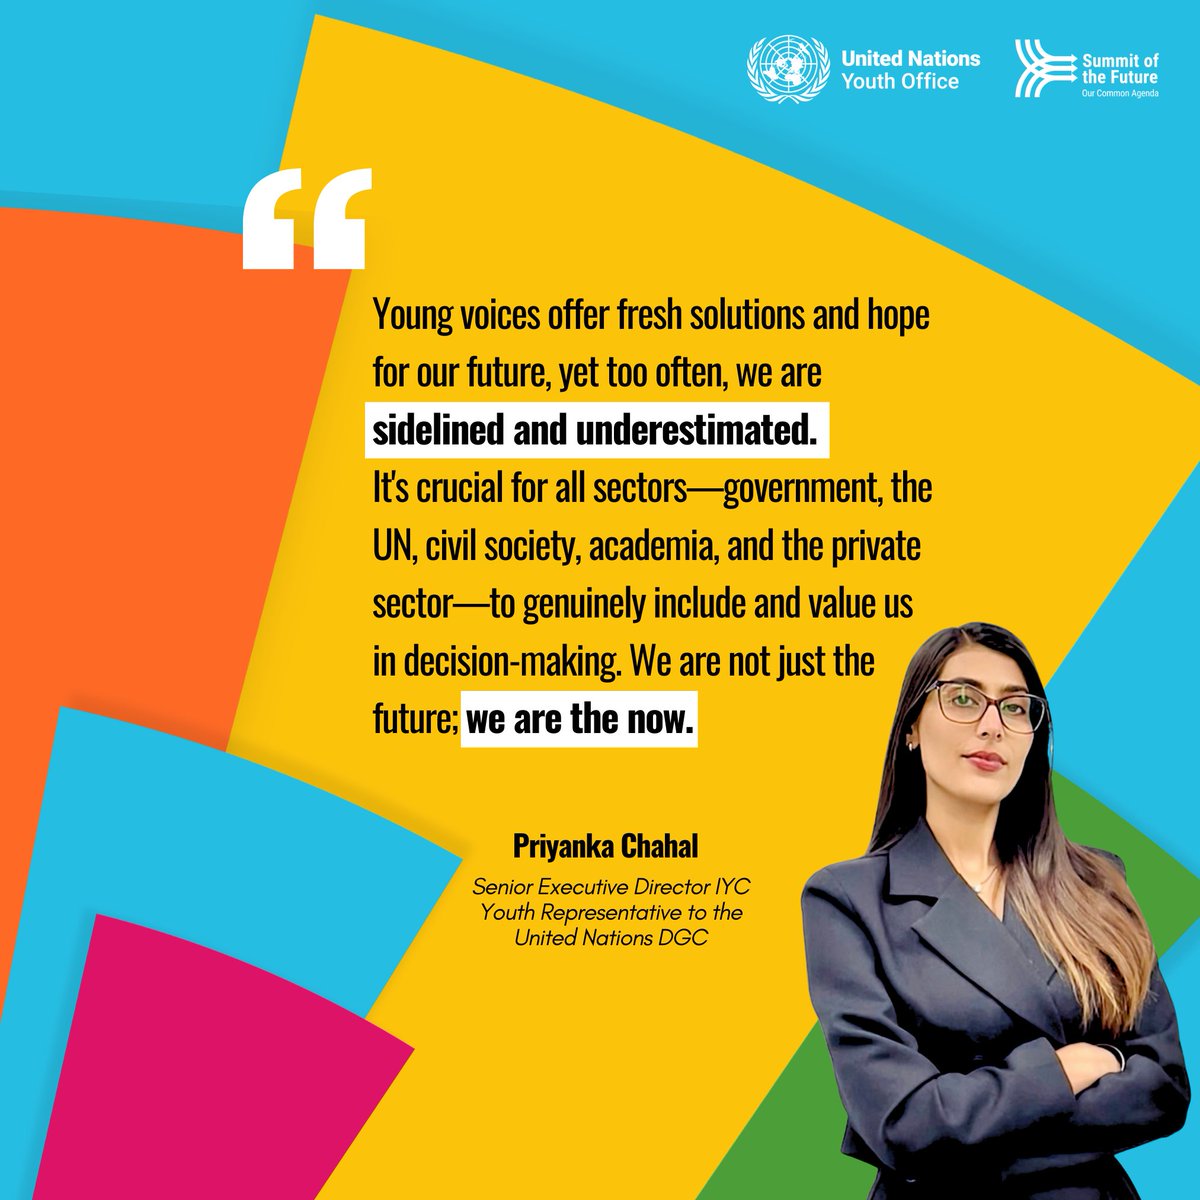 #YouthLead with fresh solutions and hope. Our voices matter now more than ever. It's time for all sectors to include and value us in decision-making. We are not just the future; we are the present. Join @UNYouthAffairs campaign by signing up here : forms.office.com/pages/response…